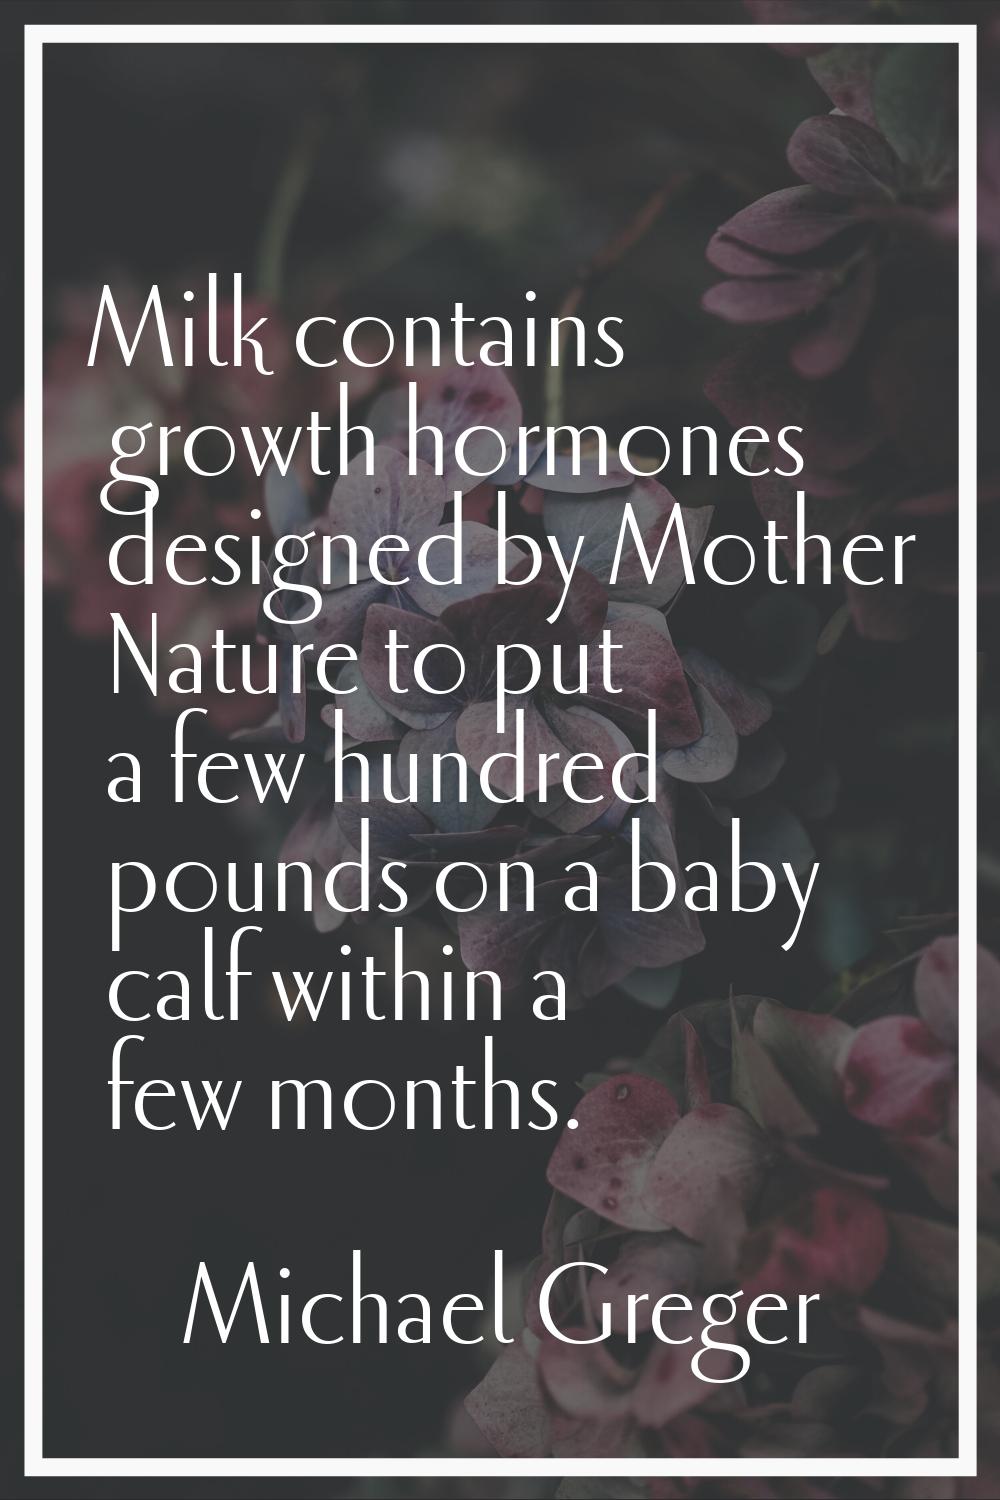 Milk contains growth hormones designed by Mother Nature to put a few hundred pounds on a baby calf 